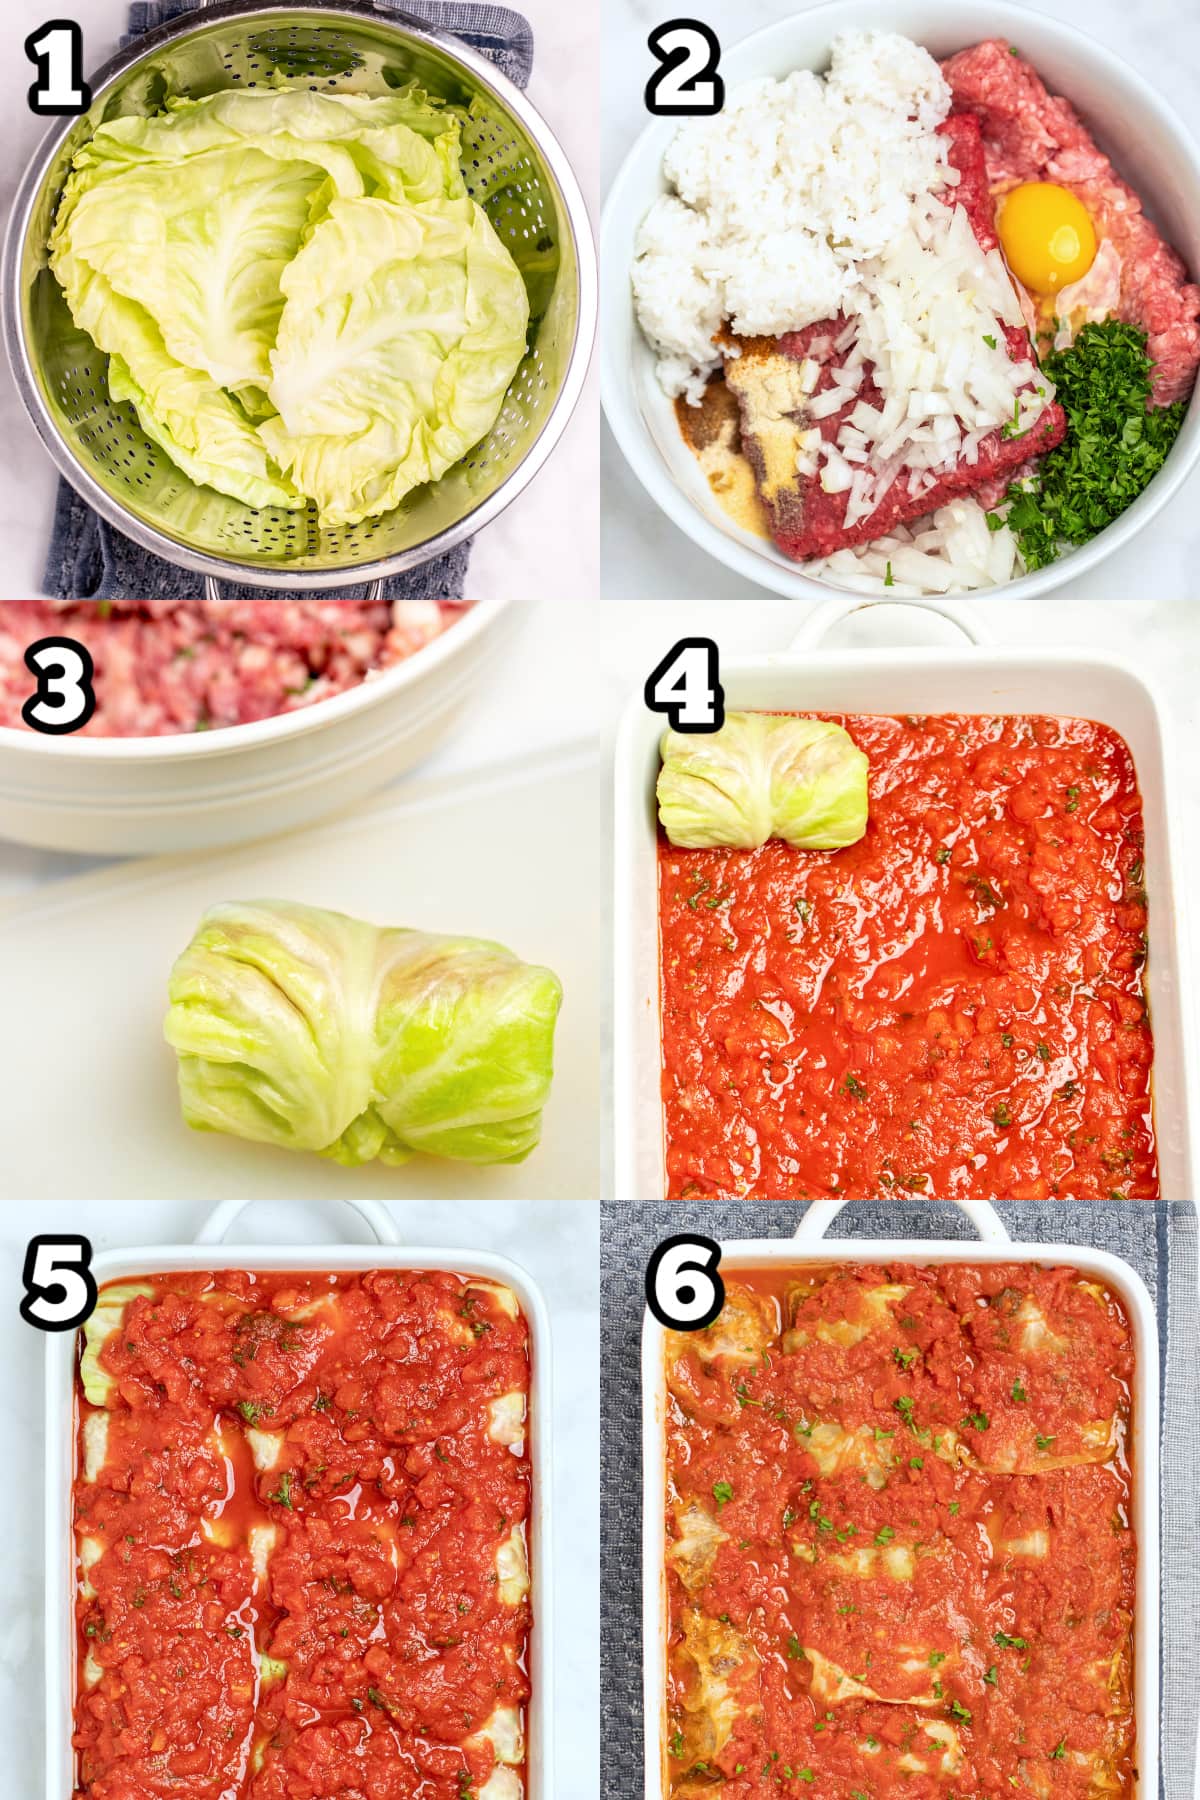 Step by step photos for how to make stuffed cabbage rolls.